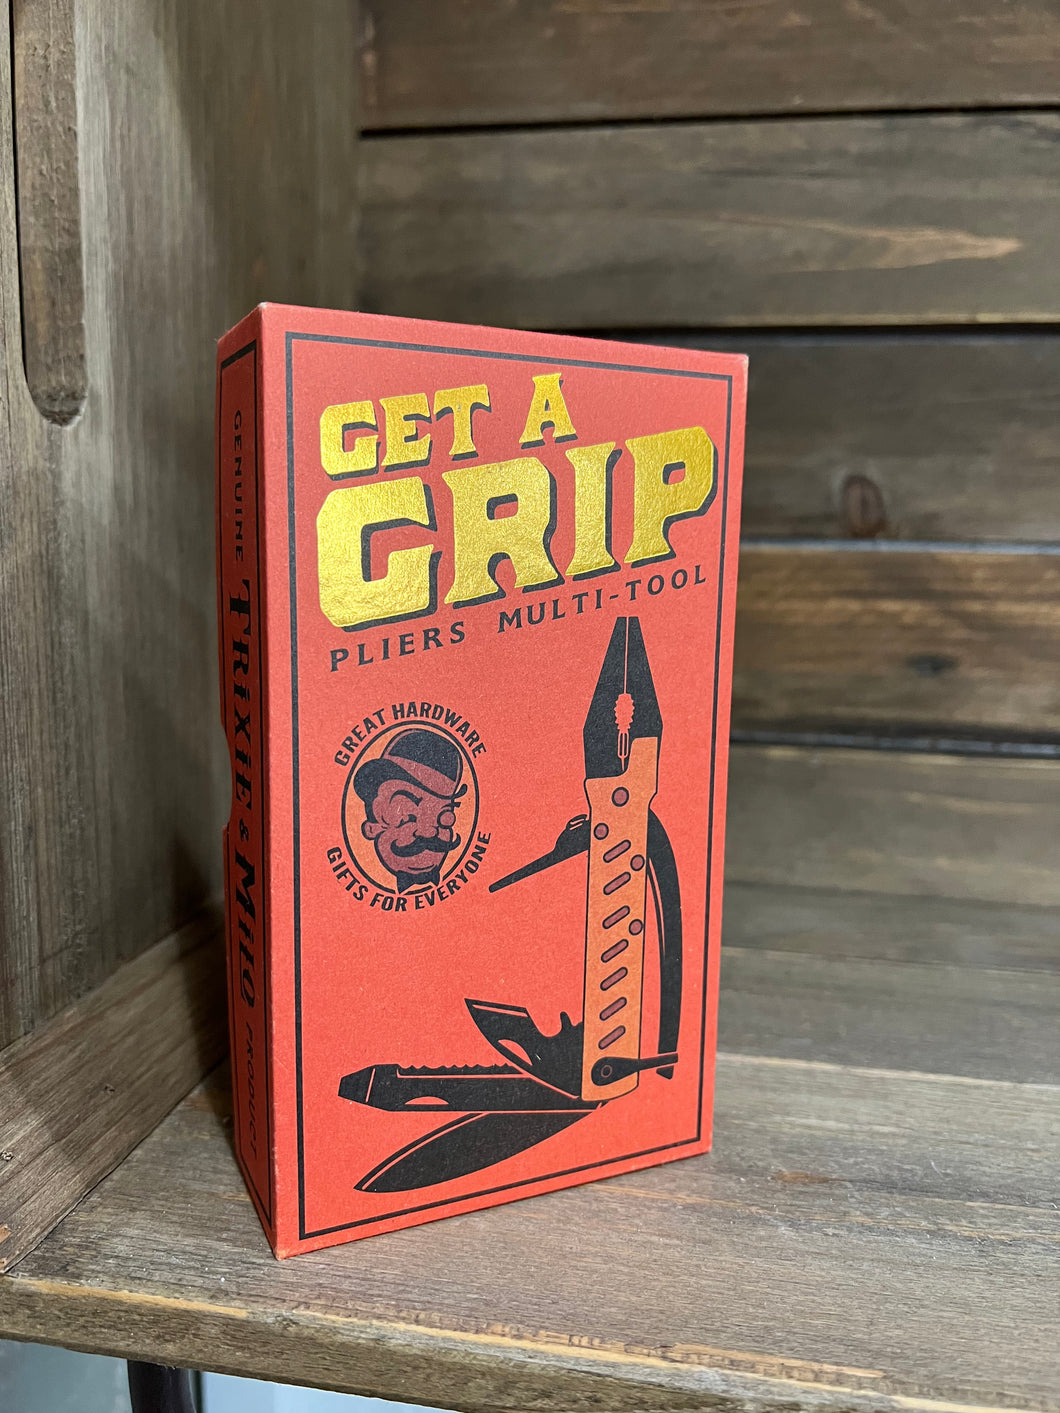 Get a Grip Pliers Multi-Tool Gift box